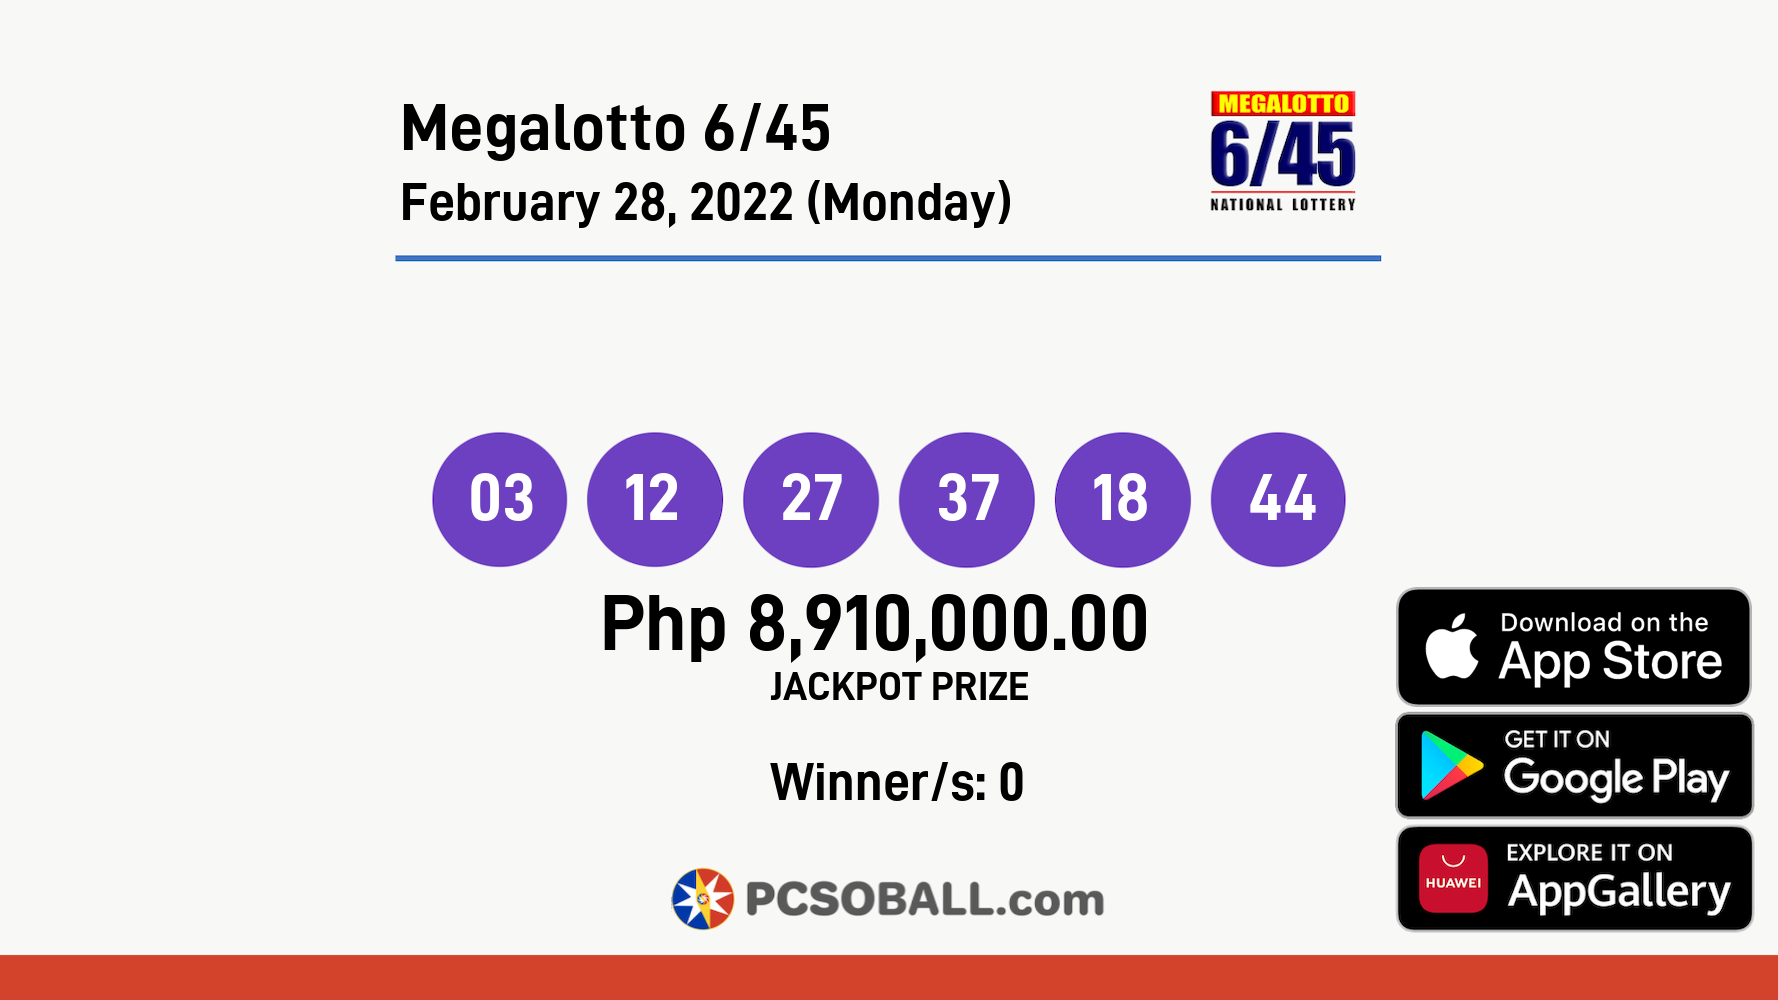 Megalotto 6/45 February 28, 2022 (Monday) Result